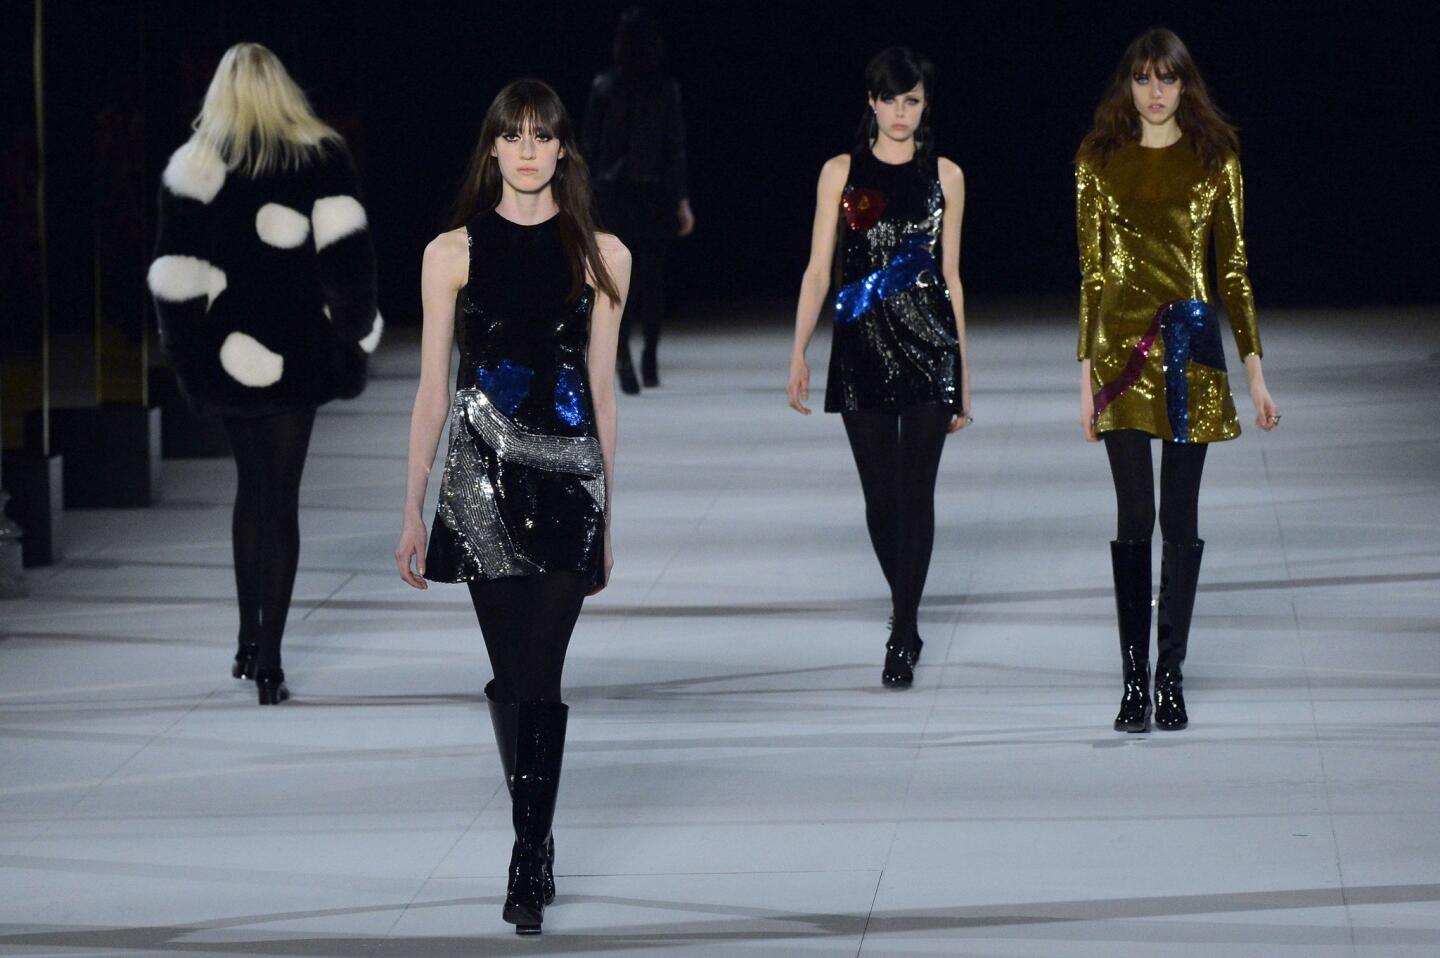 Three limited-editon mini-dresses, from right, from Saint Laurent designer Hedi Slimane were made in collaboration with L.A. artist John Baldessari.